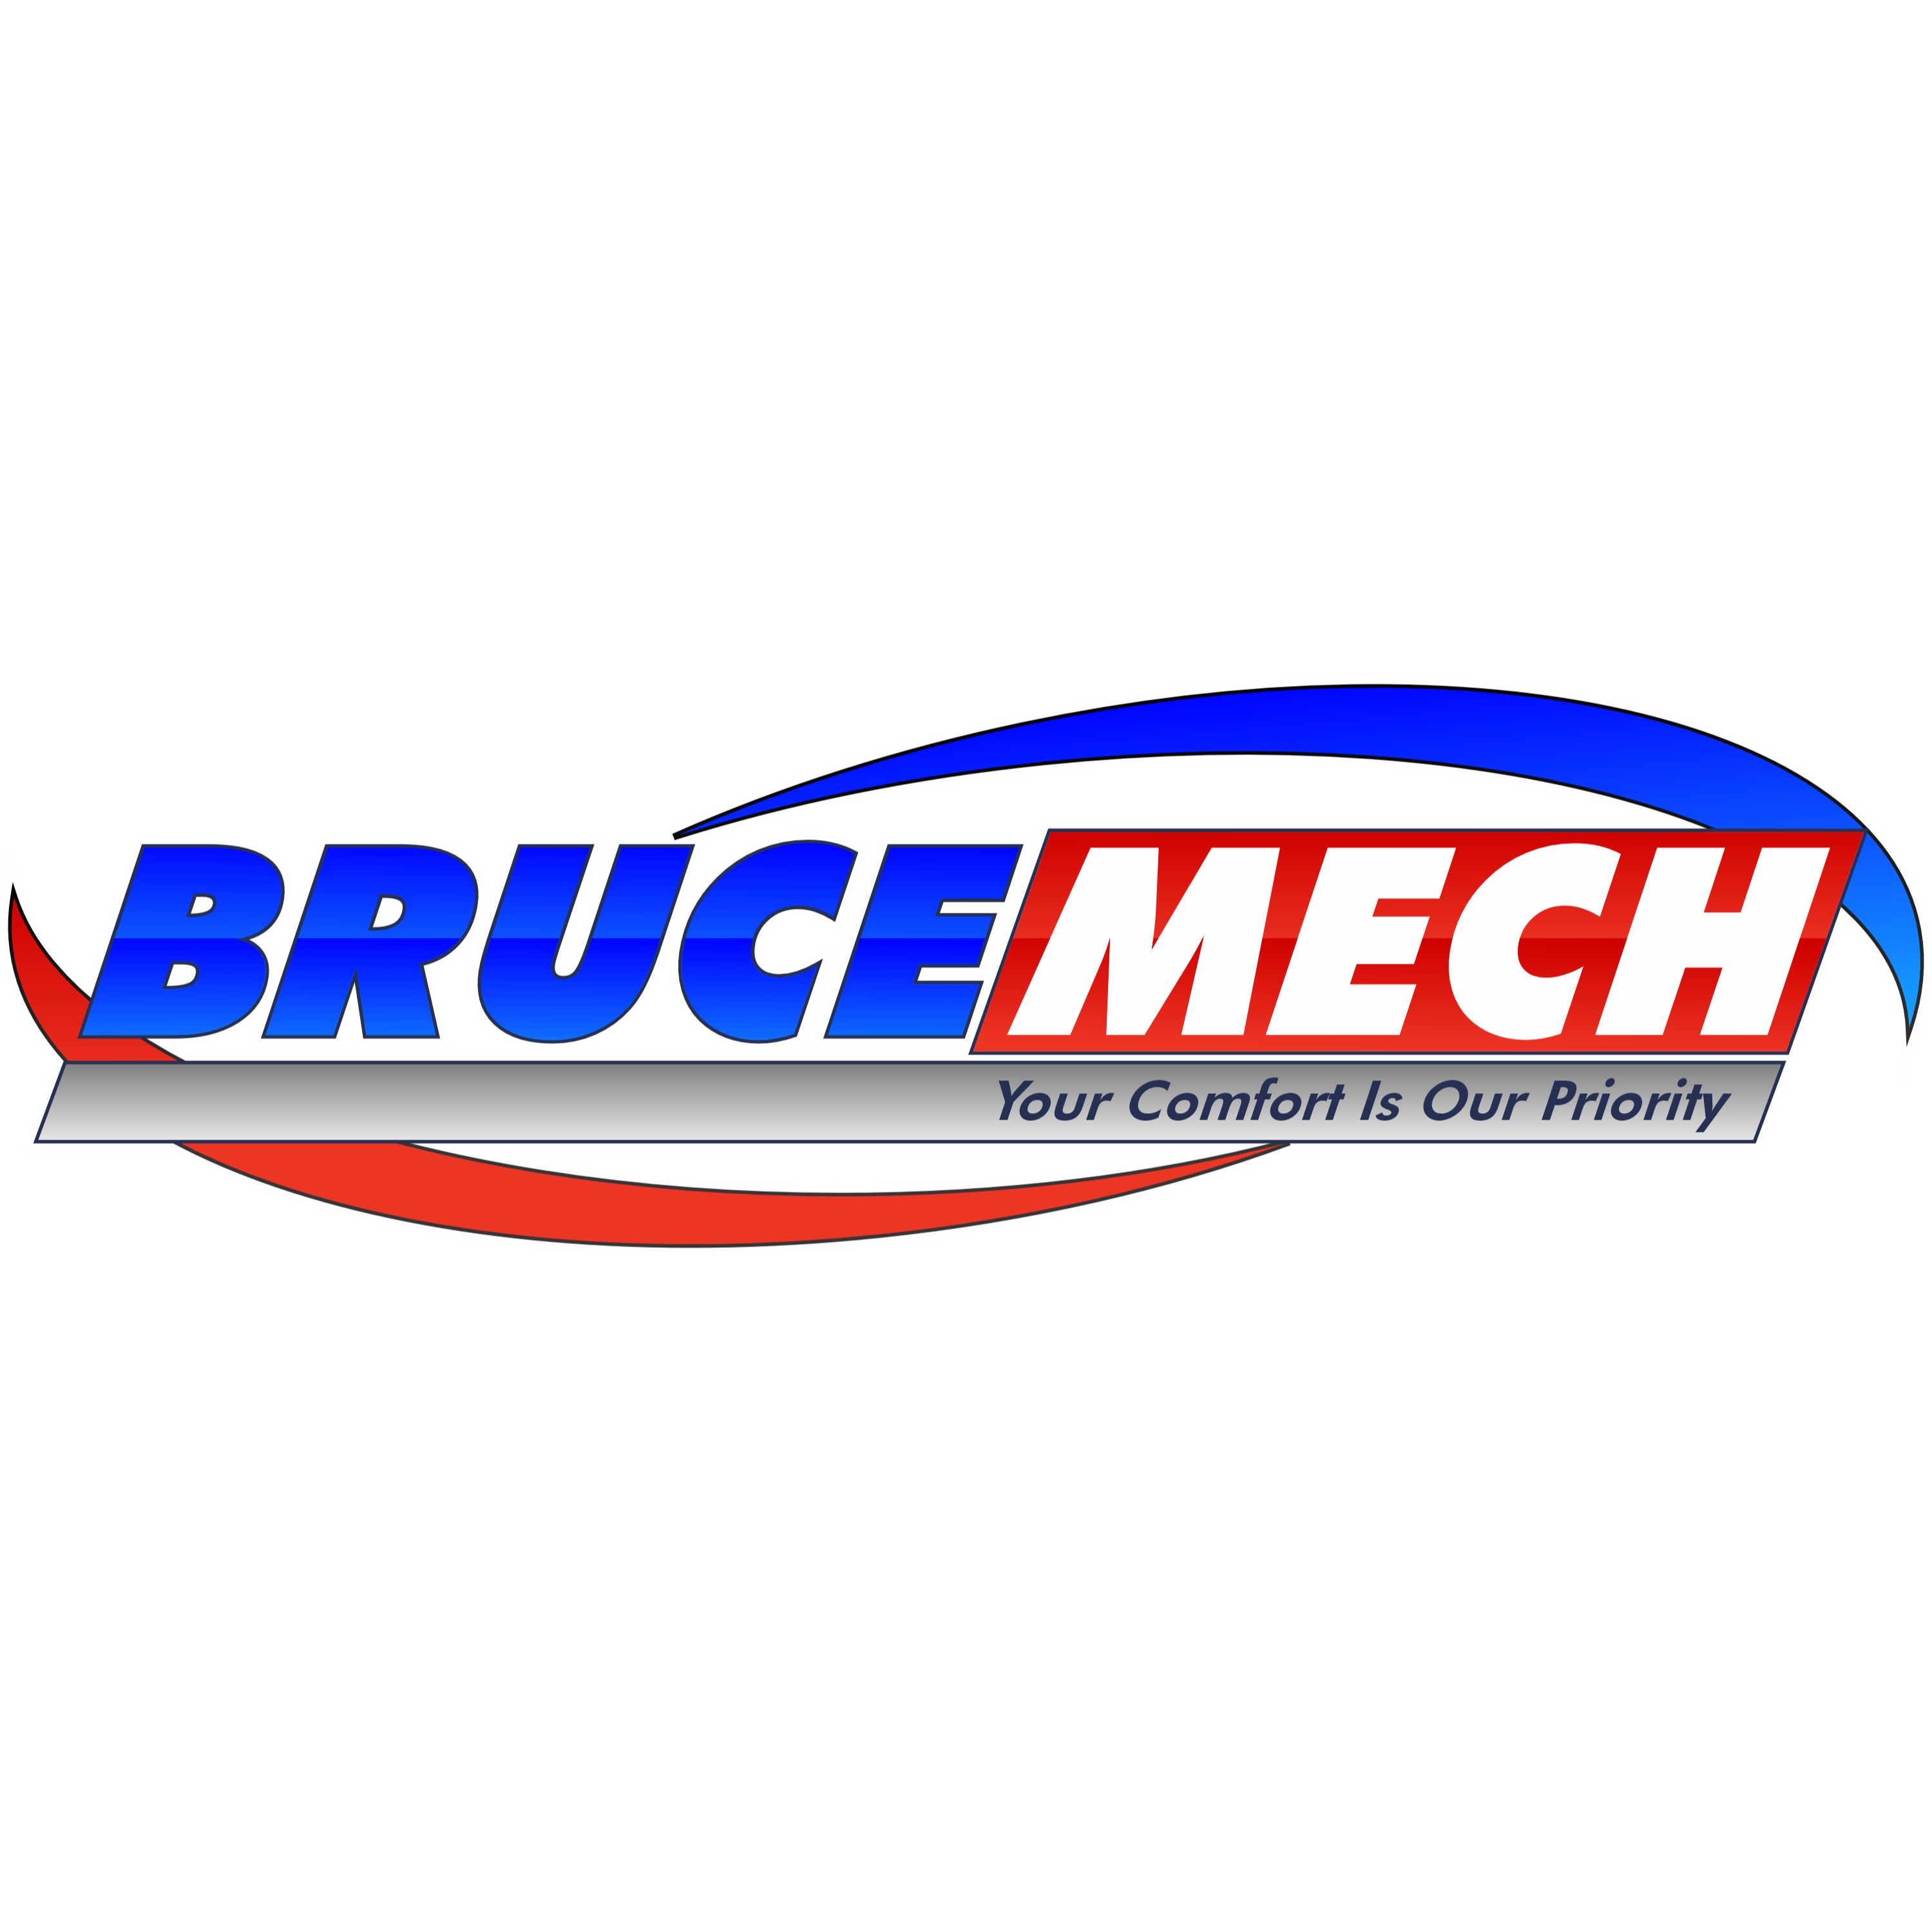 Bruce Mech Air Conditioning and Heating